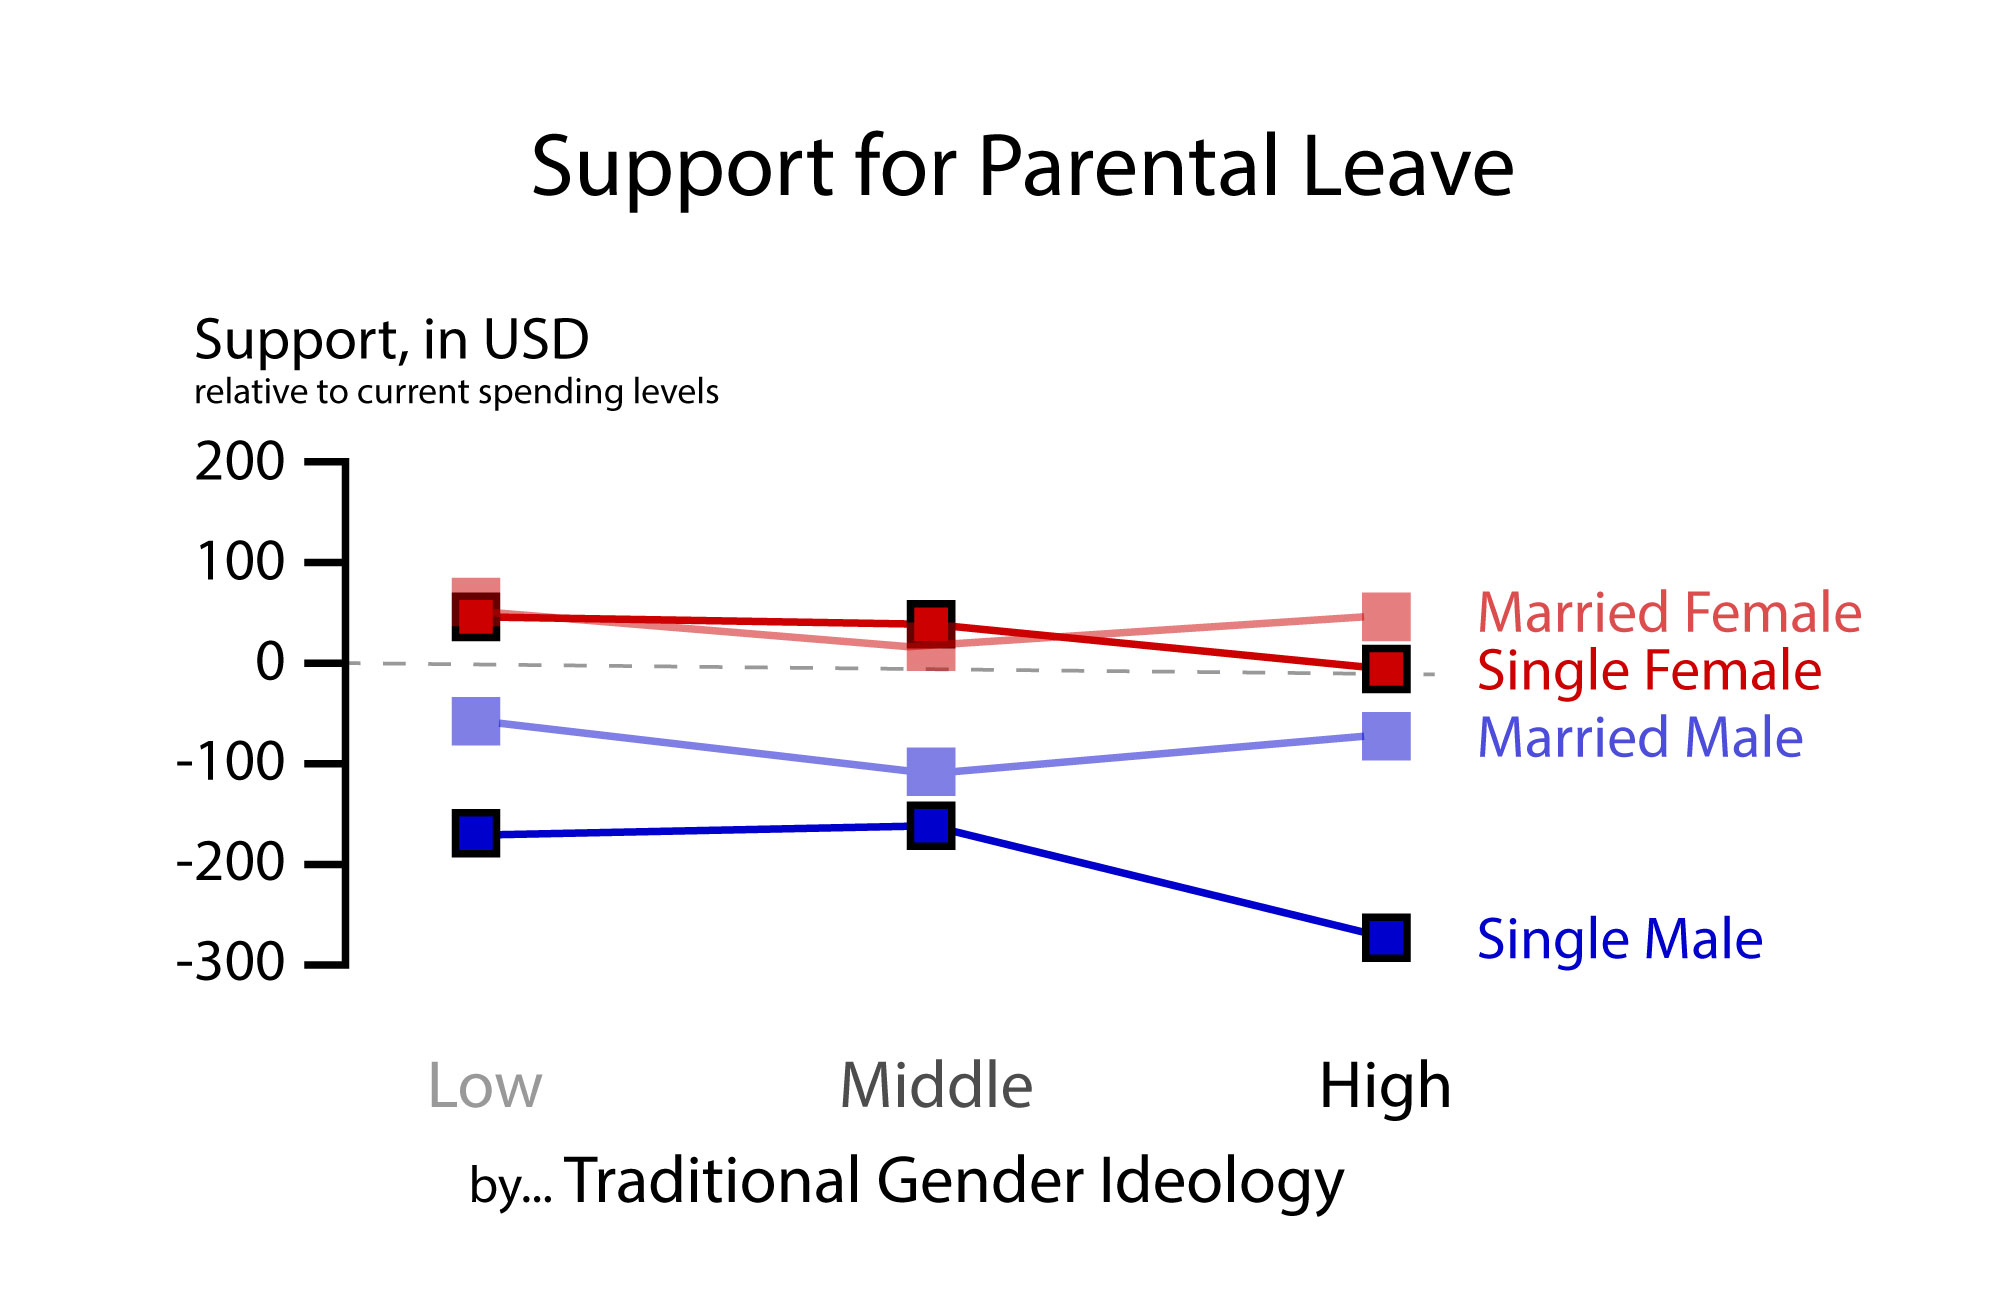 GRAPH: Support for Parental Leave by Traditional Gender Ideology